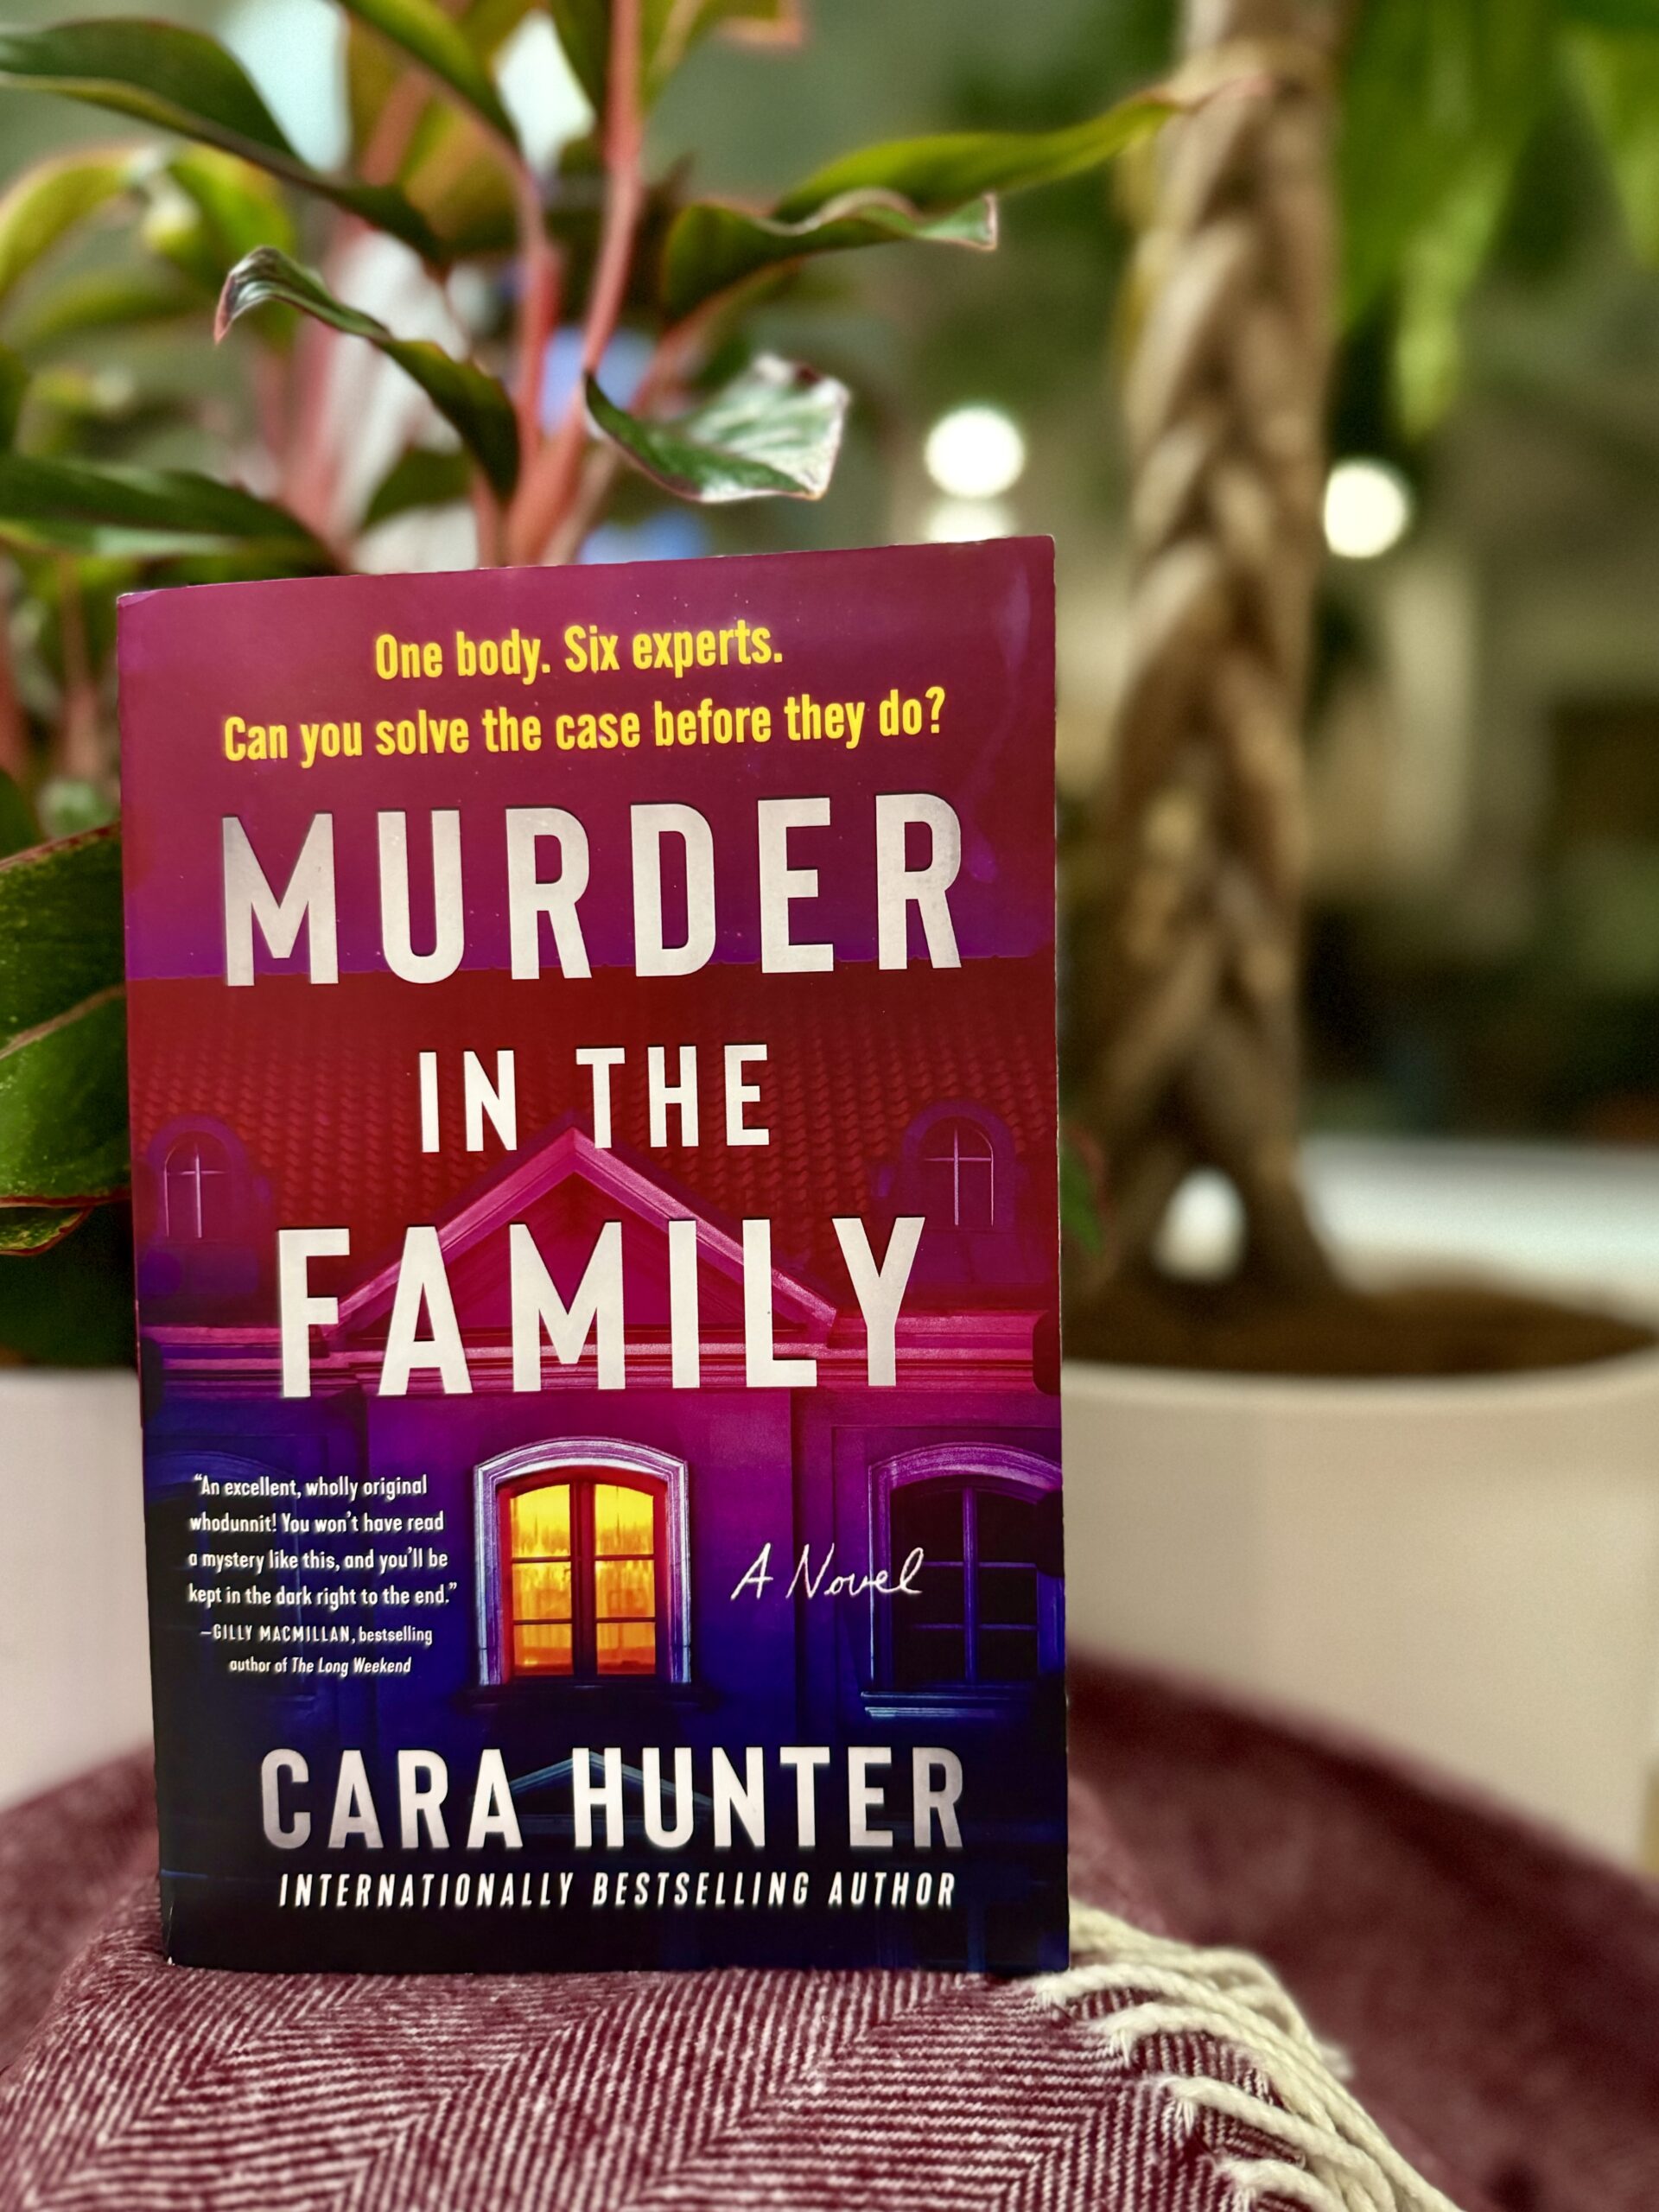 Murder in the Family: Cara Hunter plays at investigation